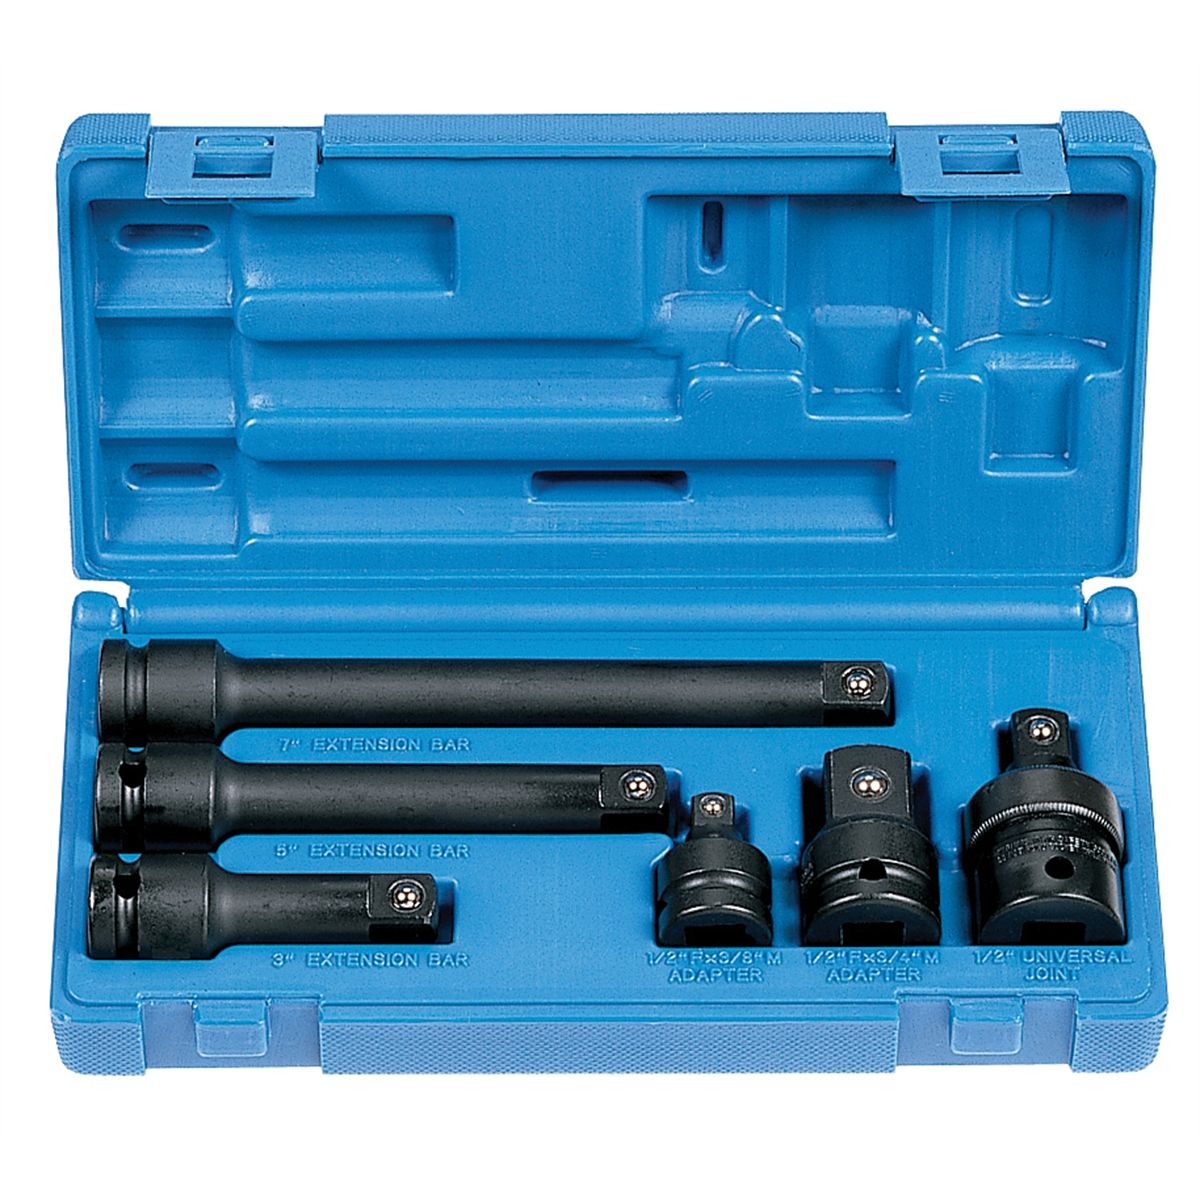 6 Piece 1/2" Drive Impact Adapter and Extension Set